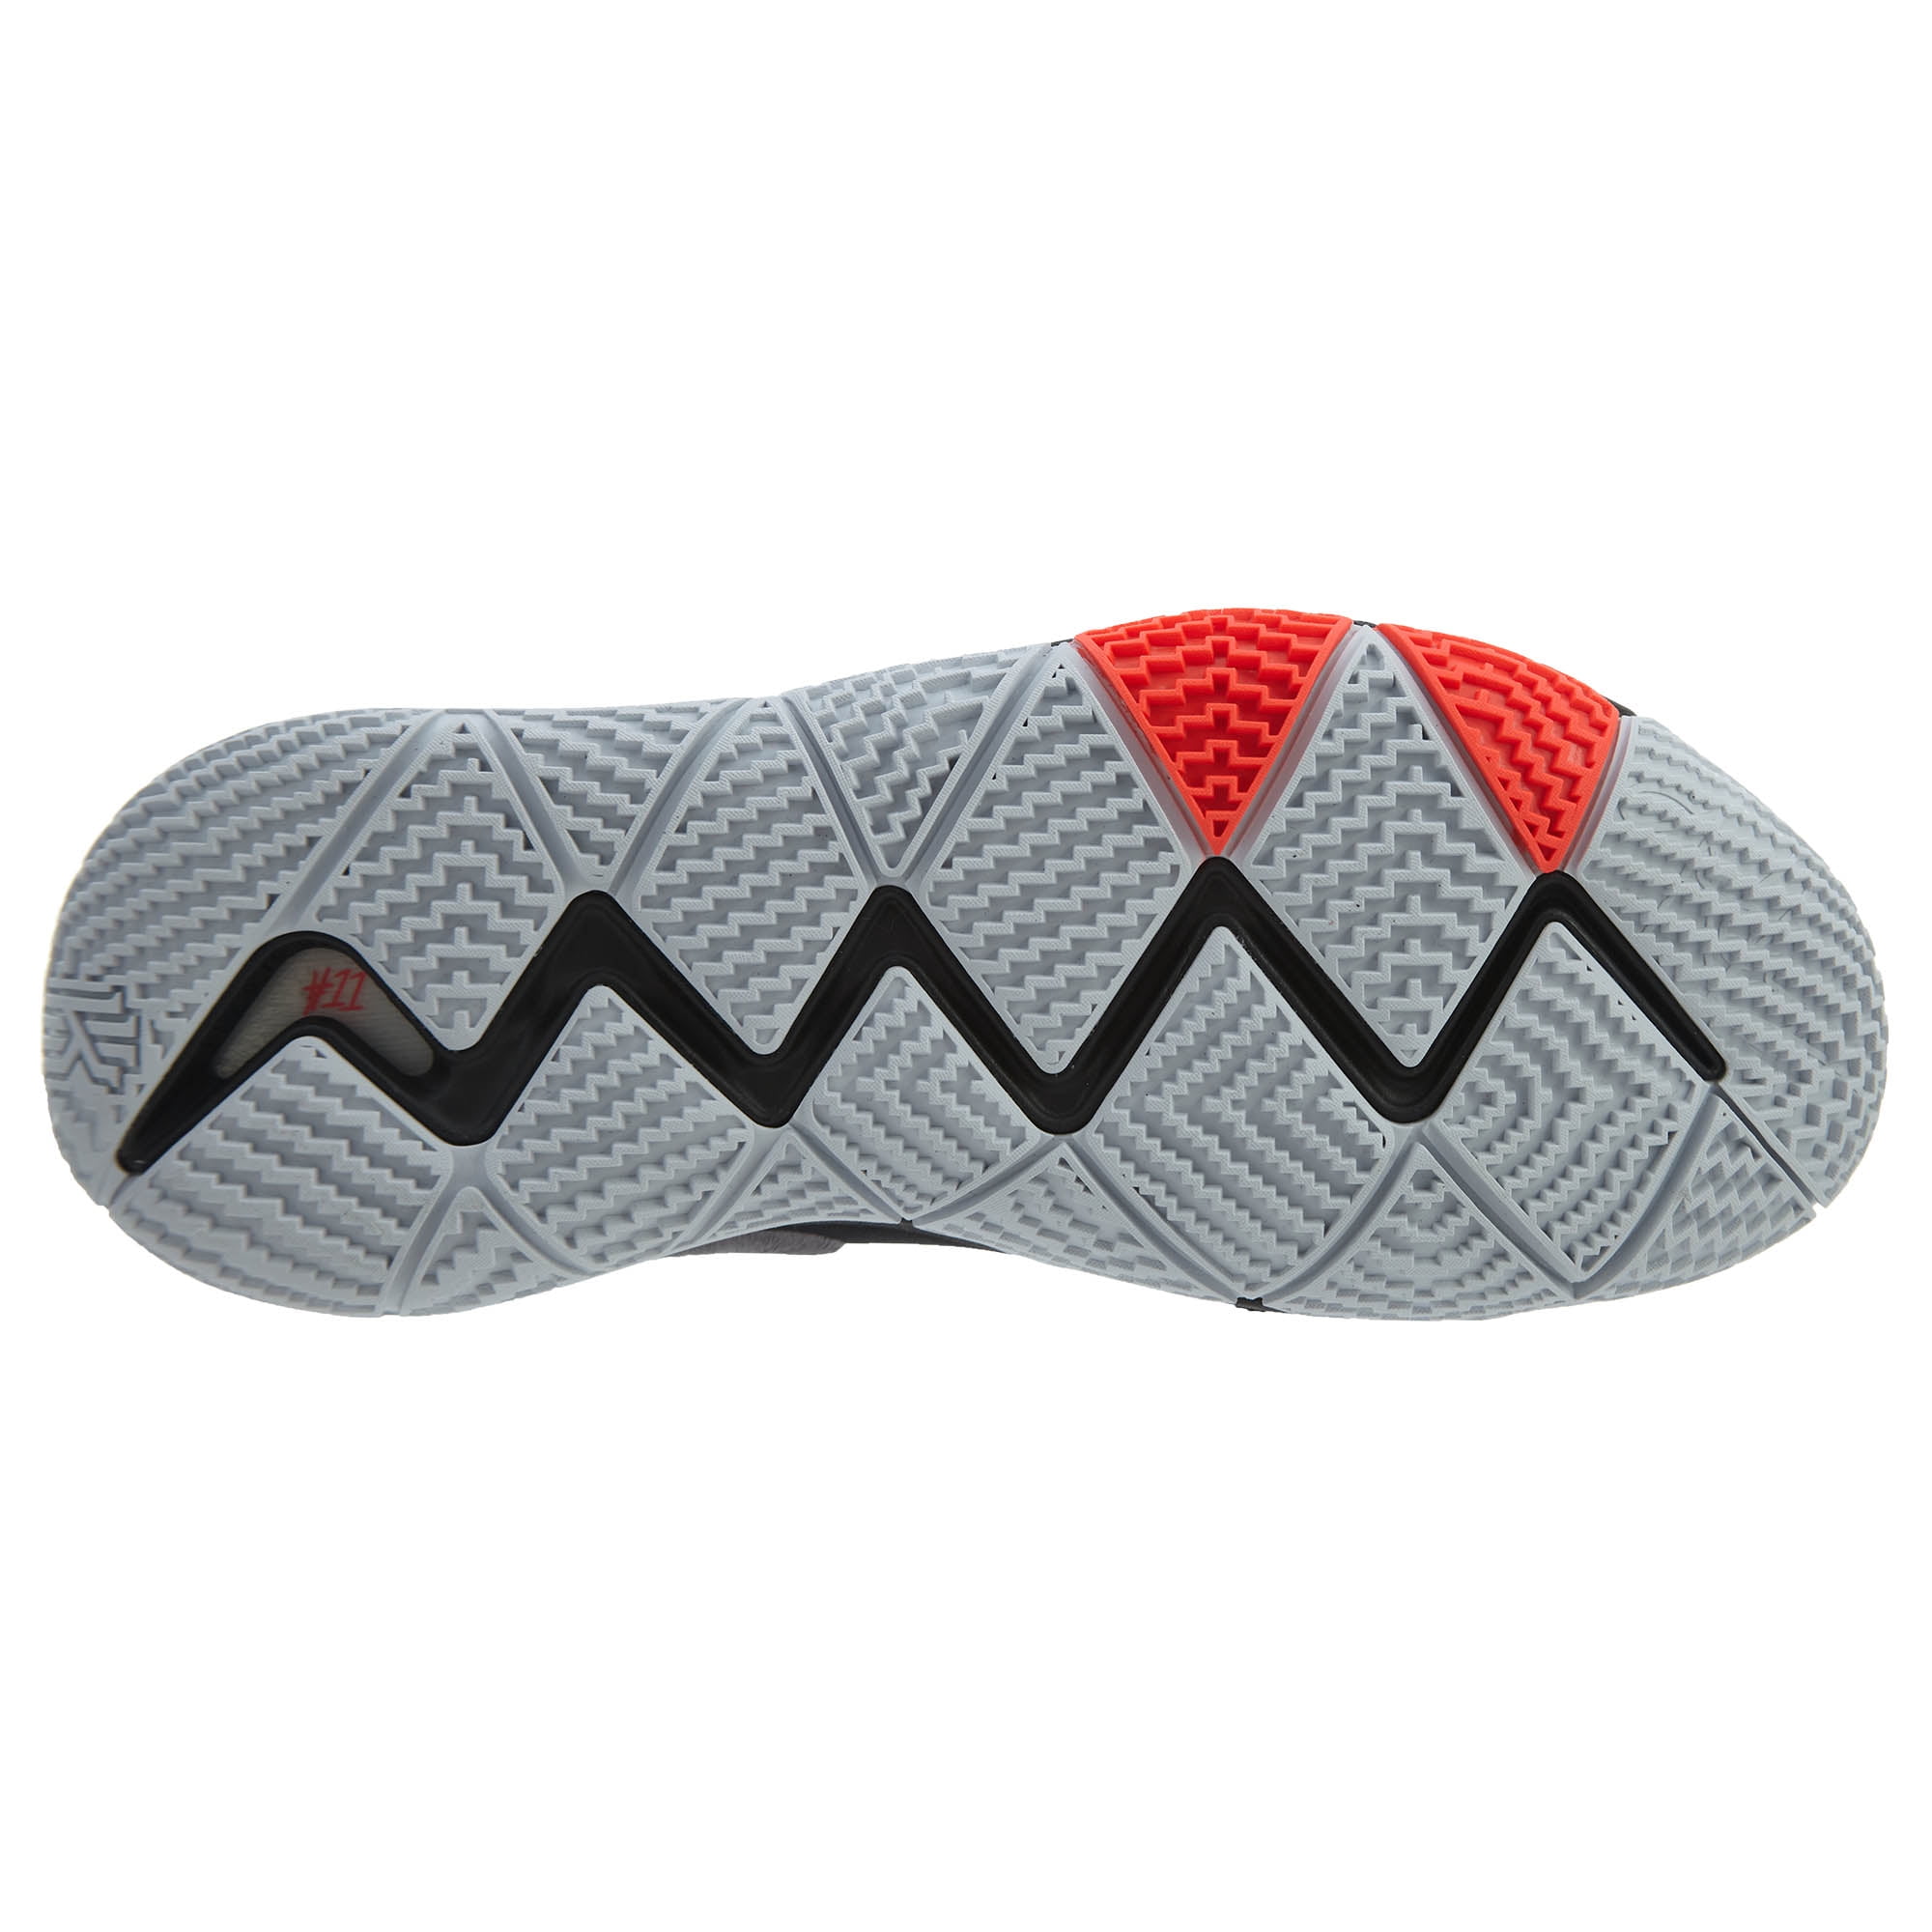 Mens Nike Kyrie 4 41 For The Ages Black Dark Grey Red White 943806